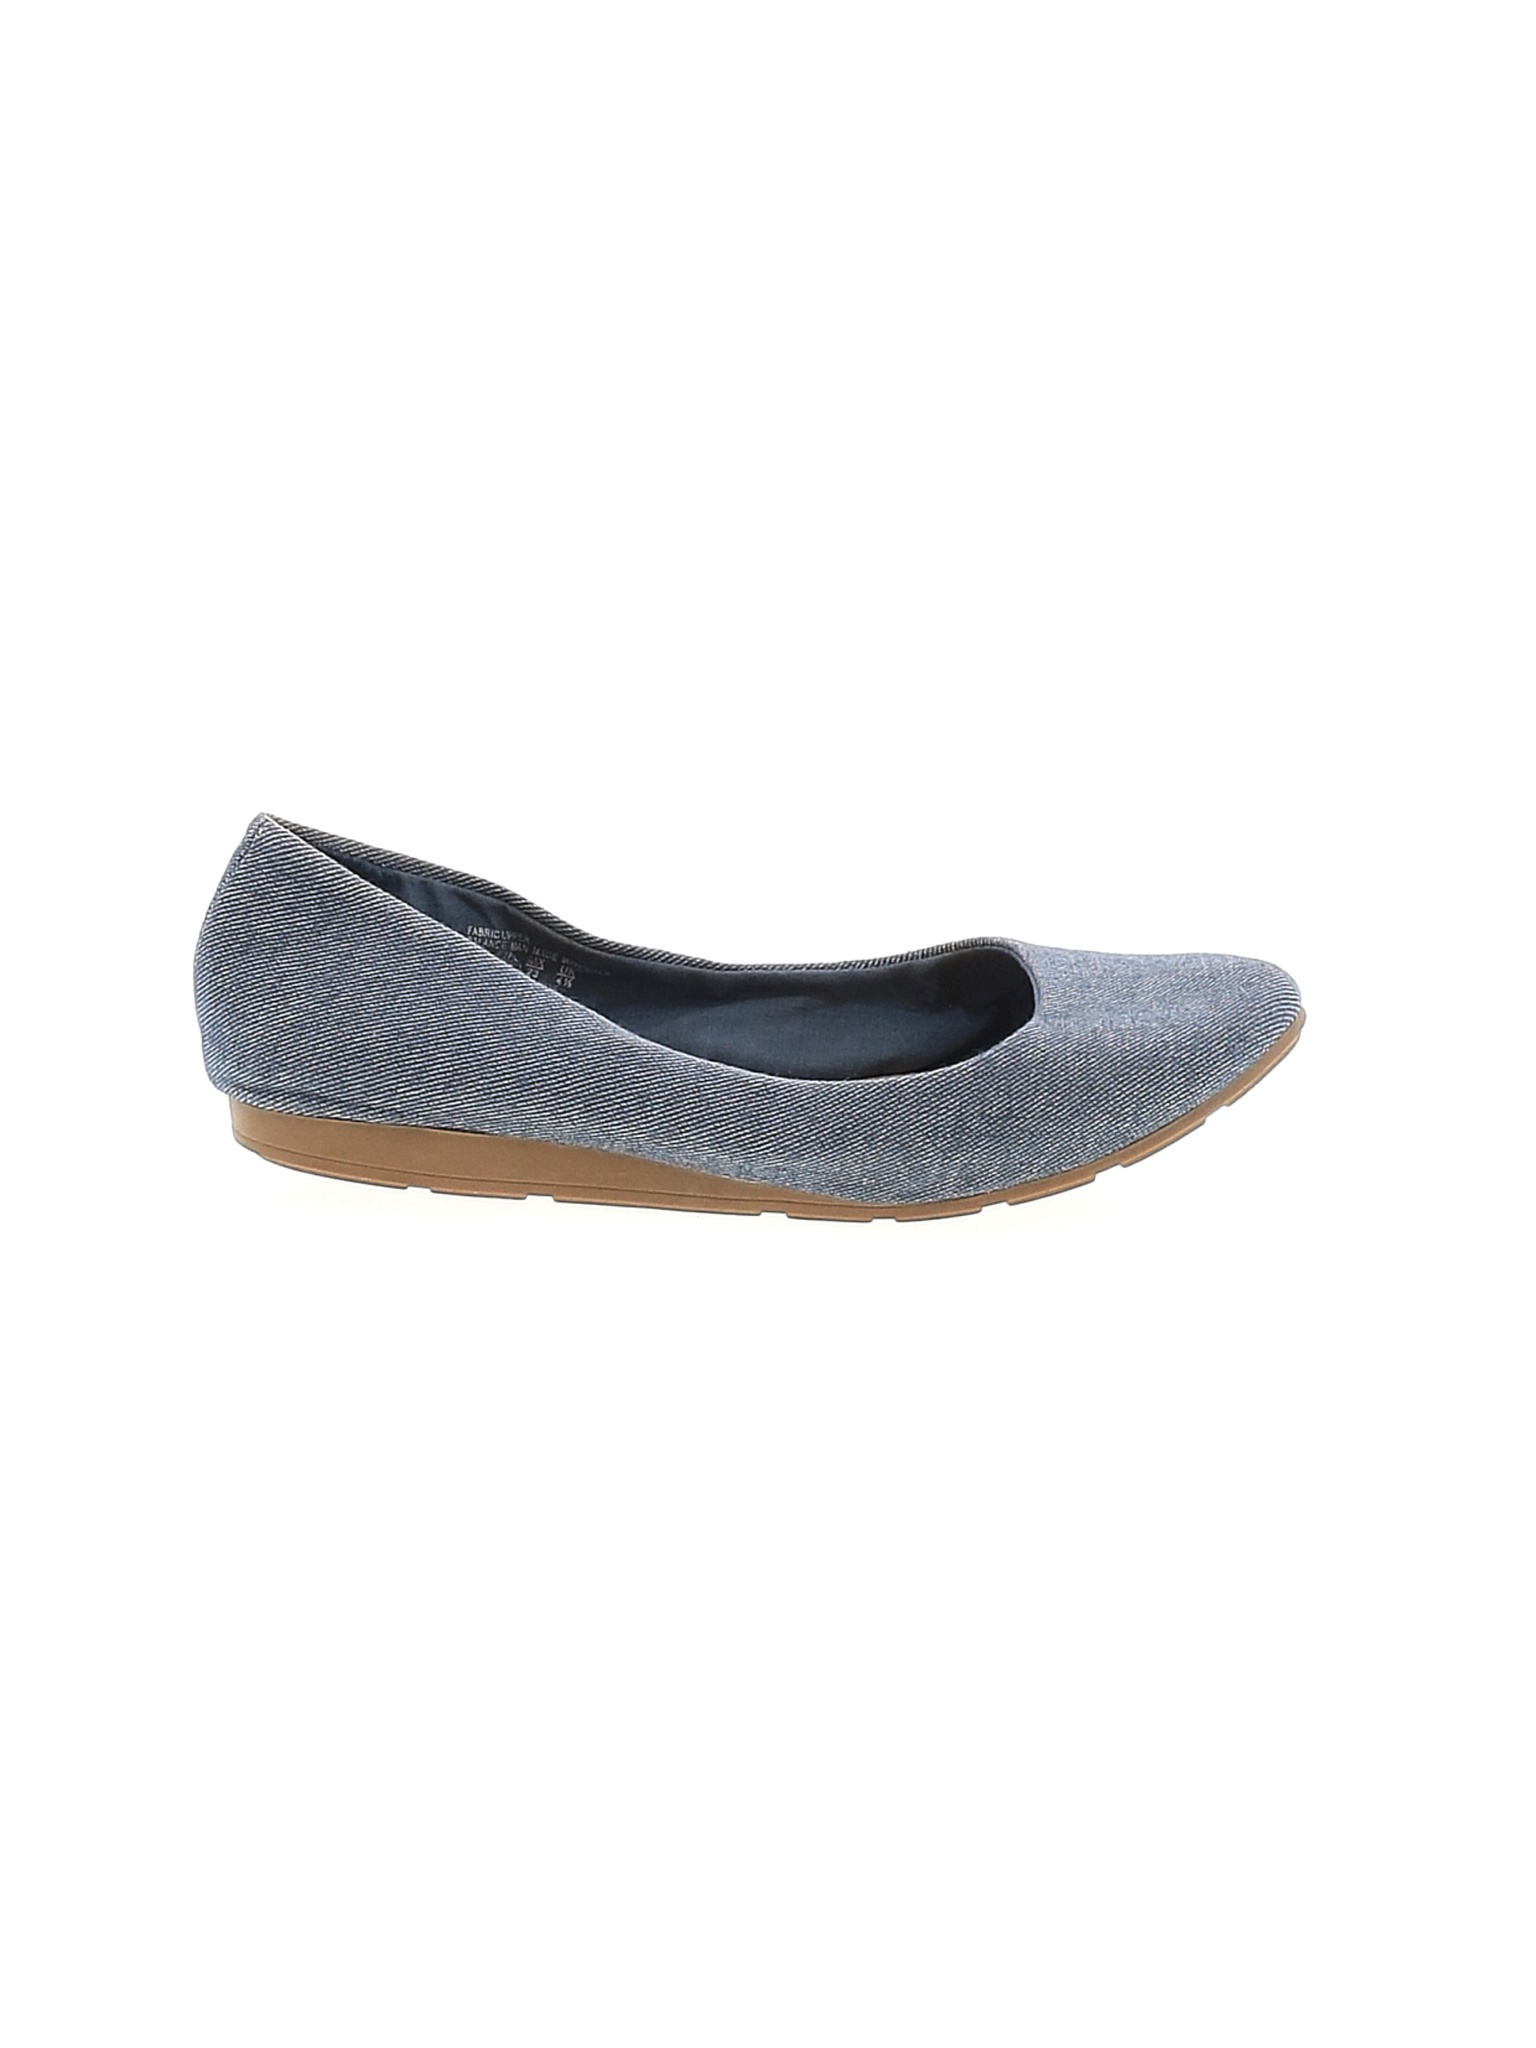 Basic Editions Women's Shoes On Sale Up 